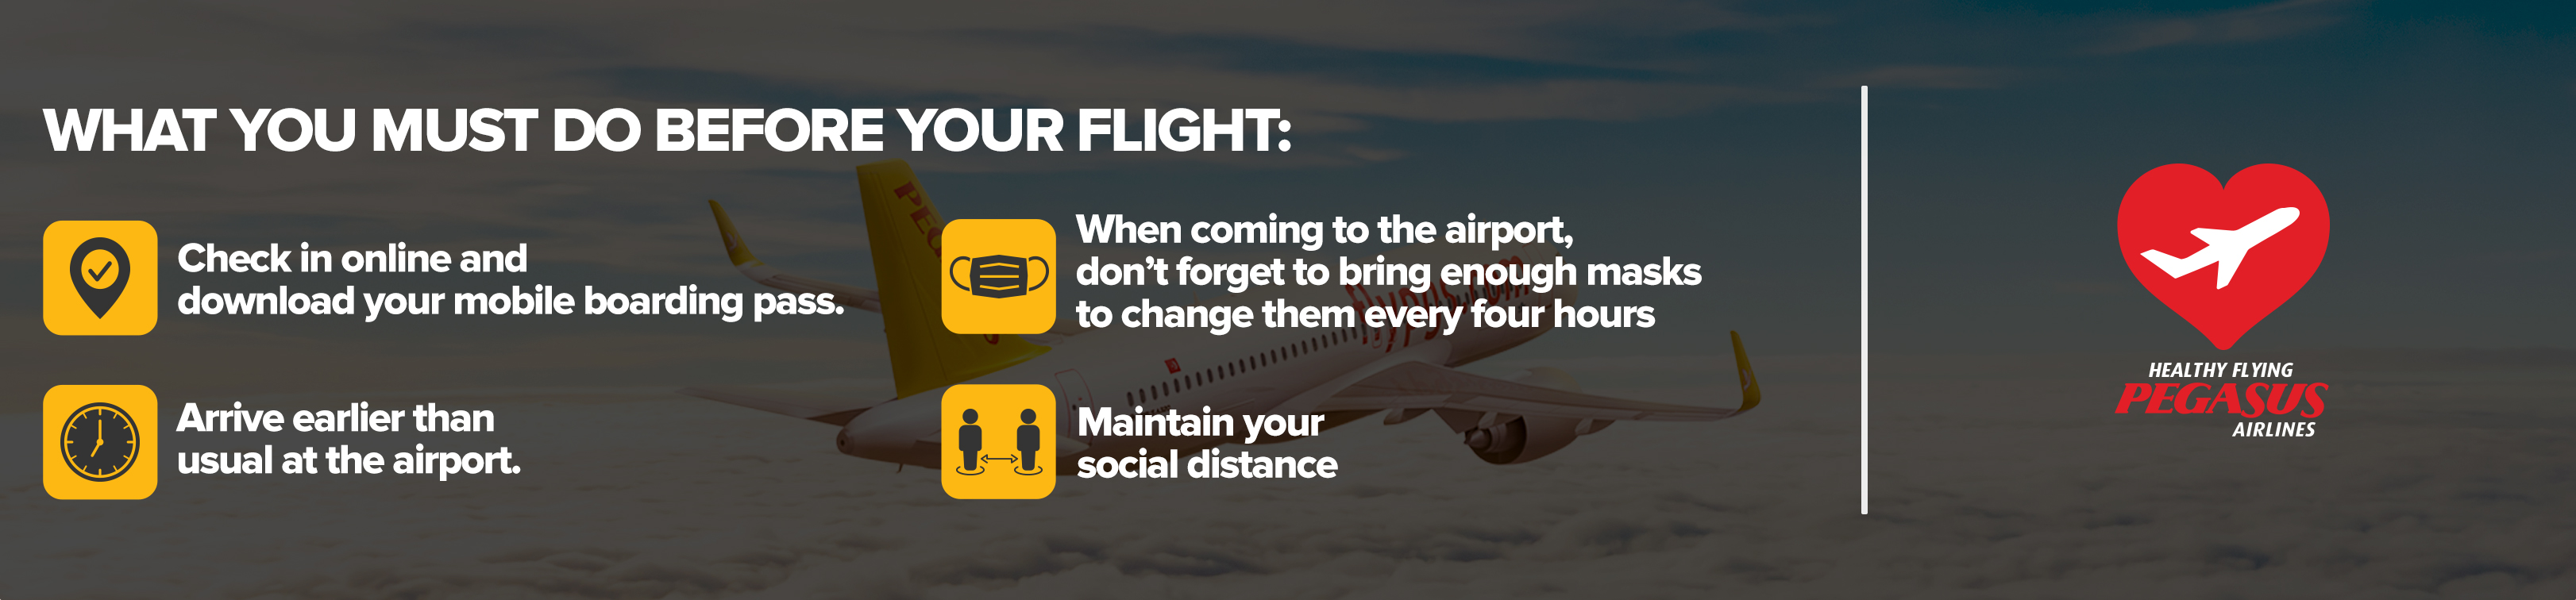 what you must do before flight